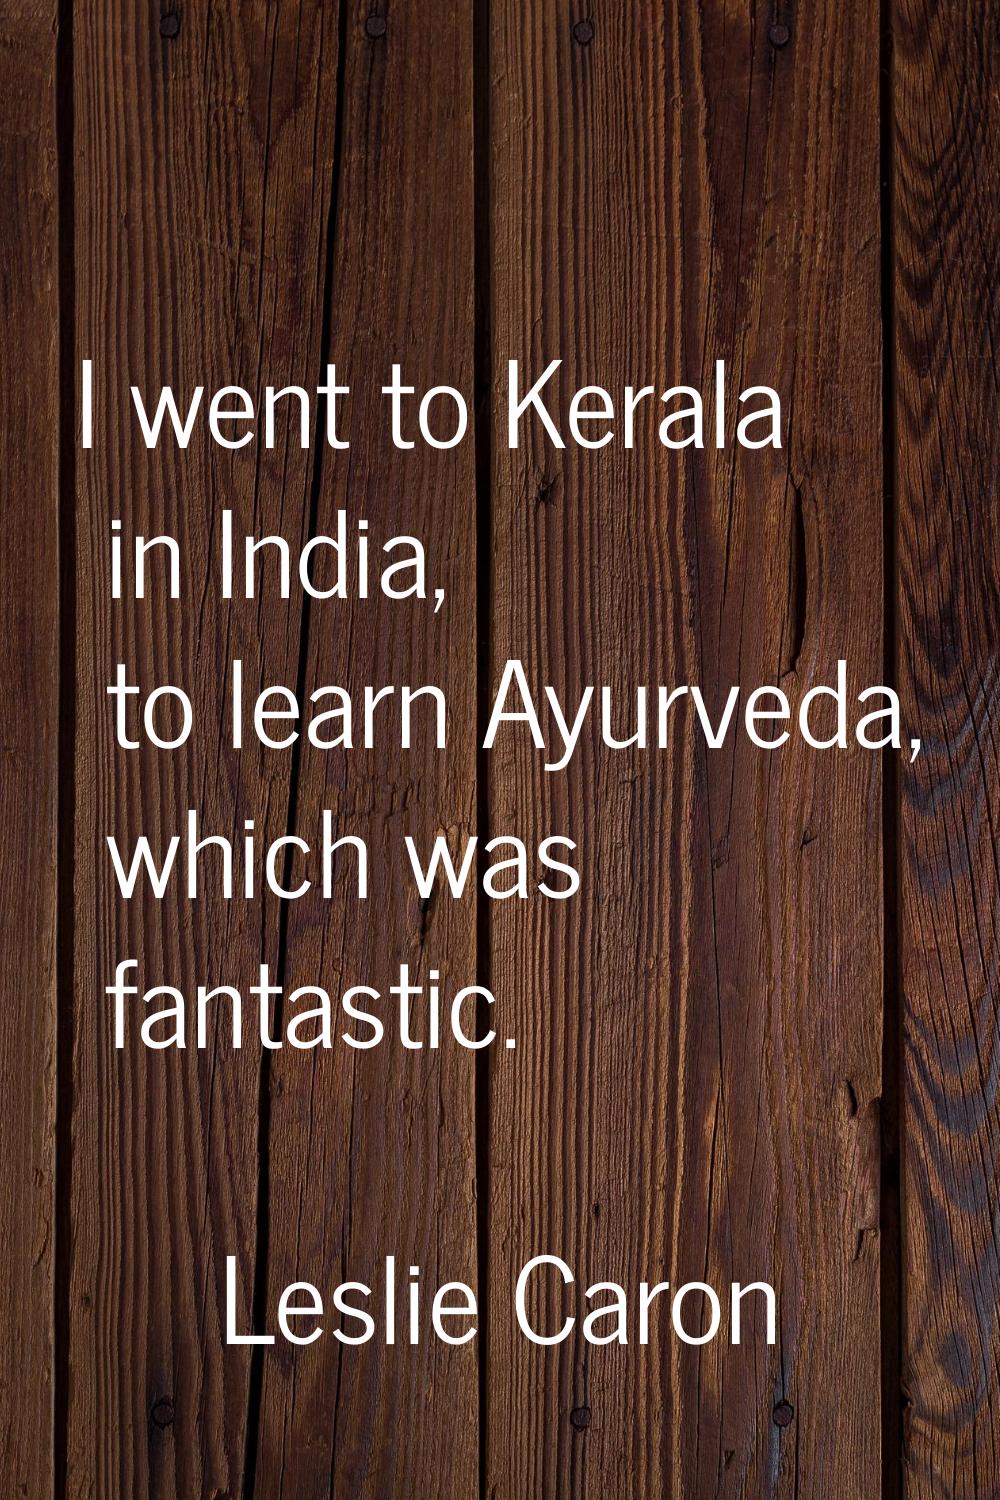 I went to Kerala in India, to learn Ayurveda, which was fantastic.